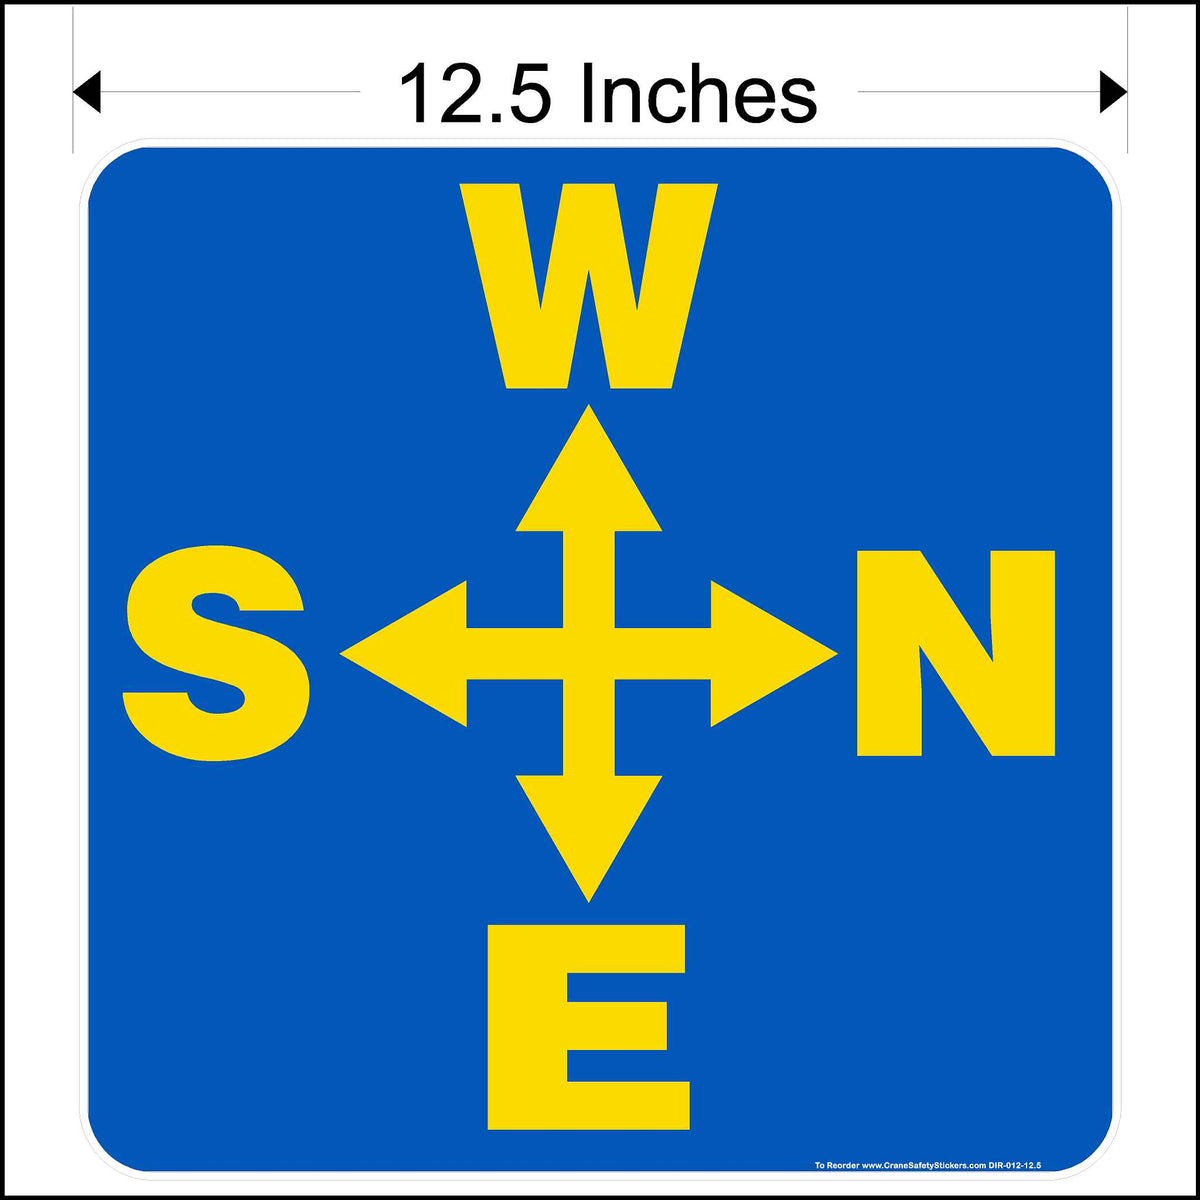 12.5 Inch overhead crane directional decal for the side of the crane. West, North, East, and South Arrows printed in yellow on blue background.